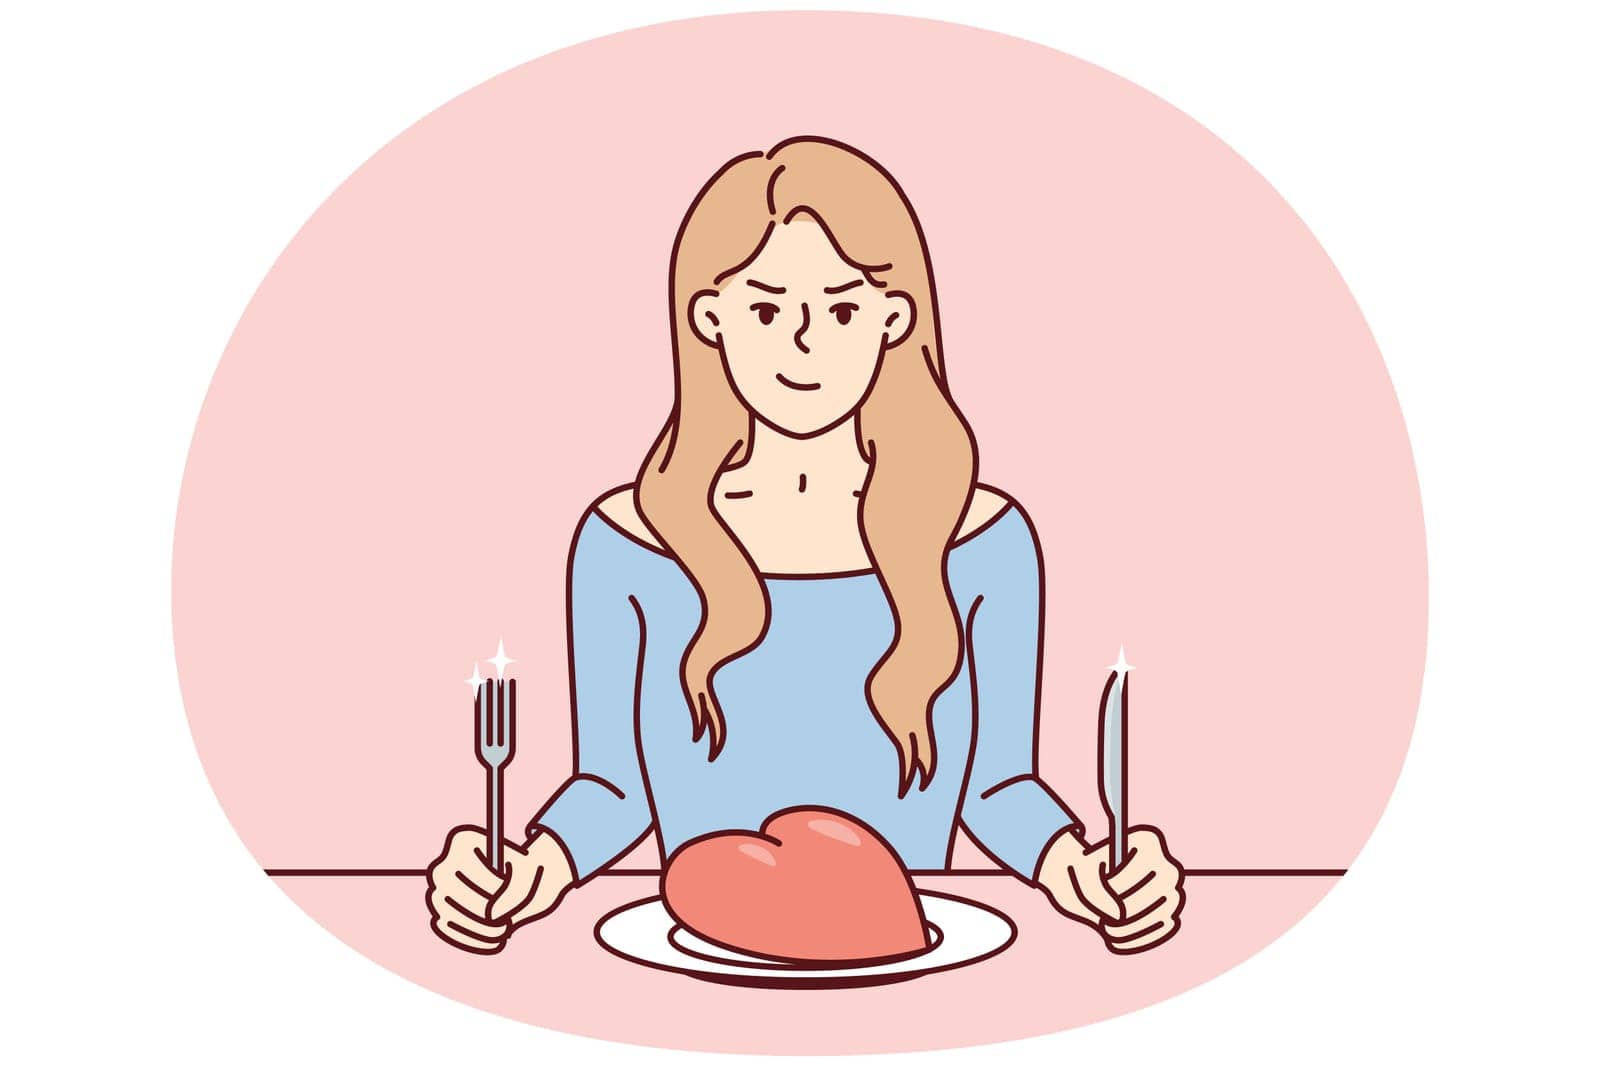 Frowning woman sits at table with giant heart in plate and holds fork with knife. Vector image by Vasilyeva